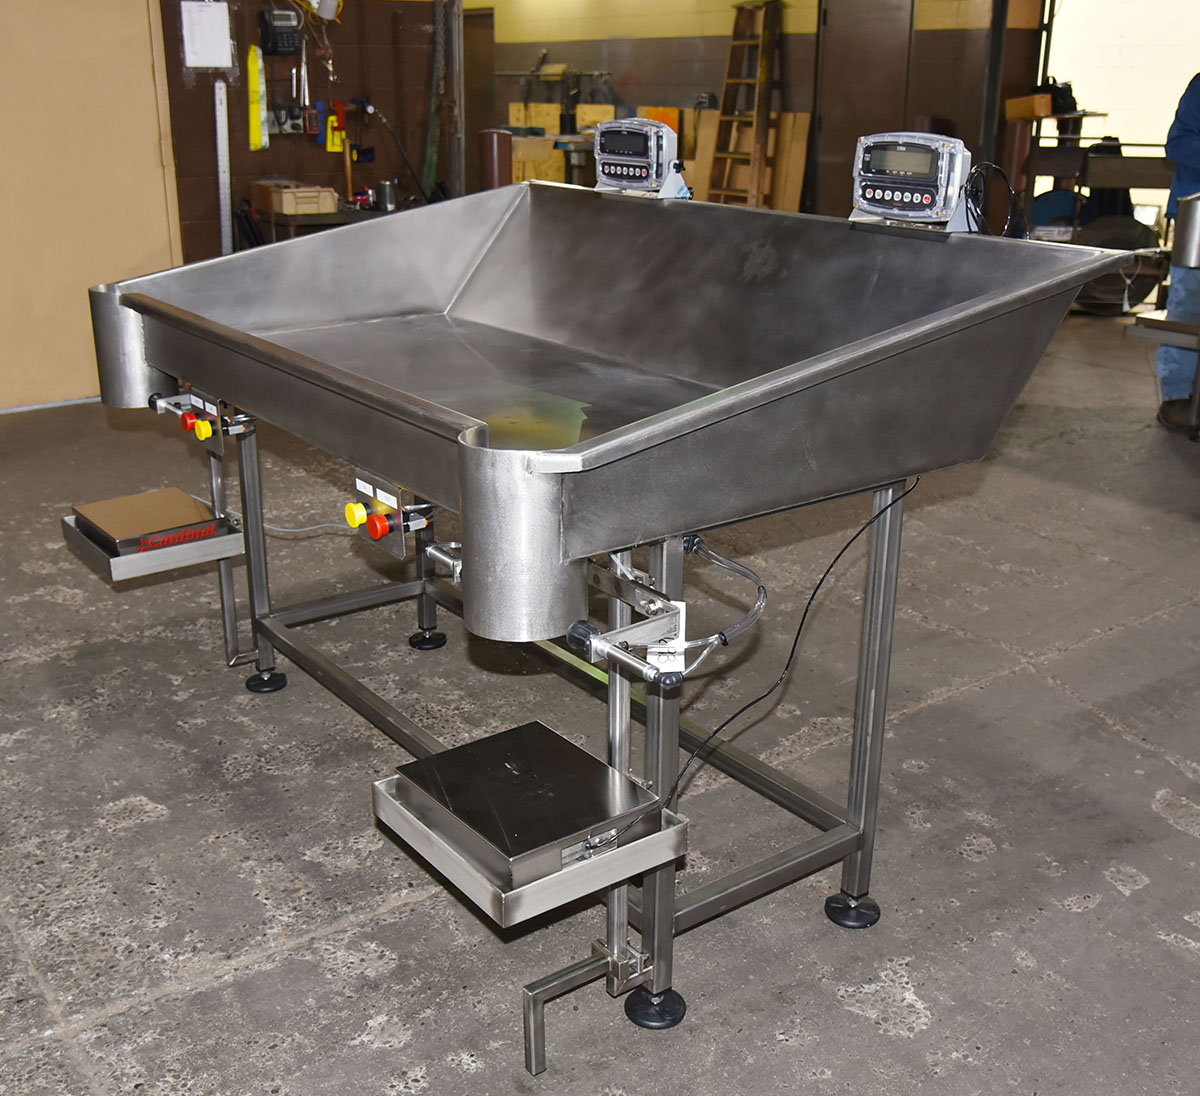 HAND PACK BAG FILLING TABLE, 2-station, food grade, stainless steel, net-weigh, fill by weight, in stock new, Alard item Y5693